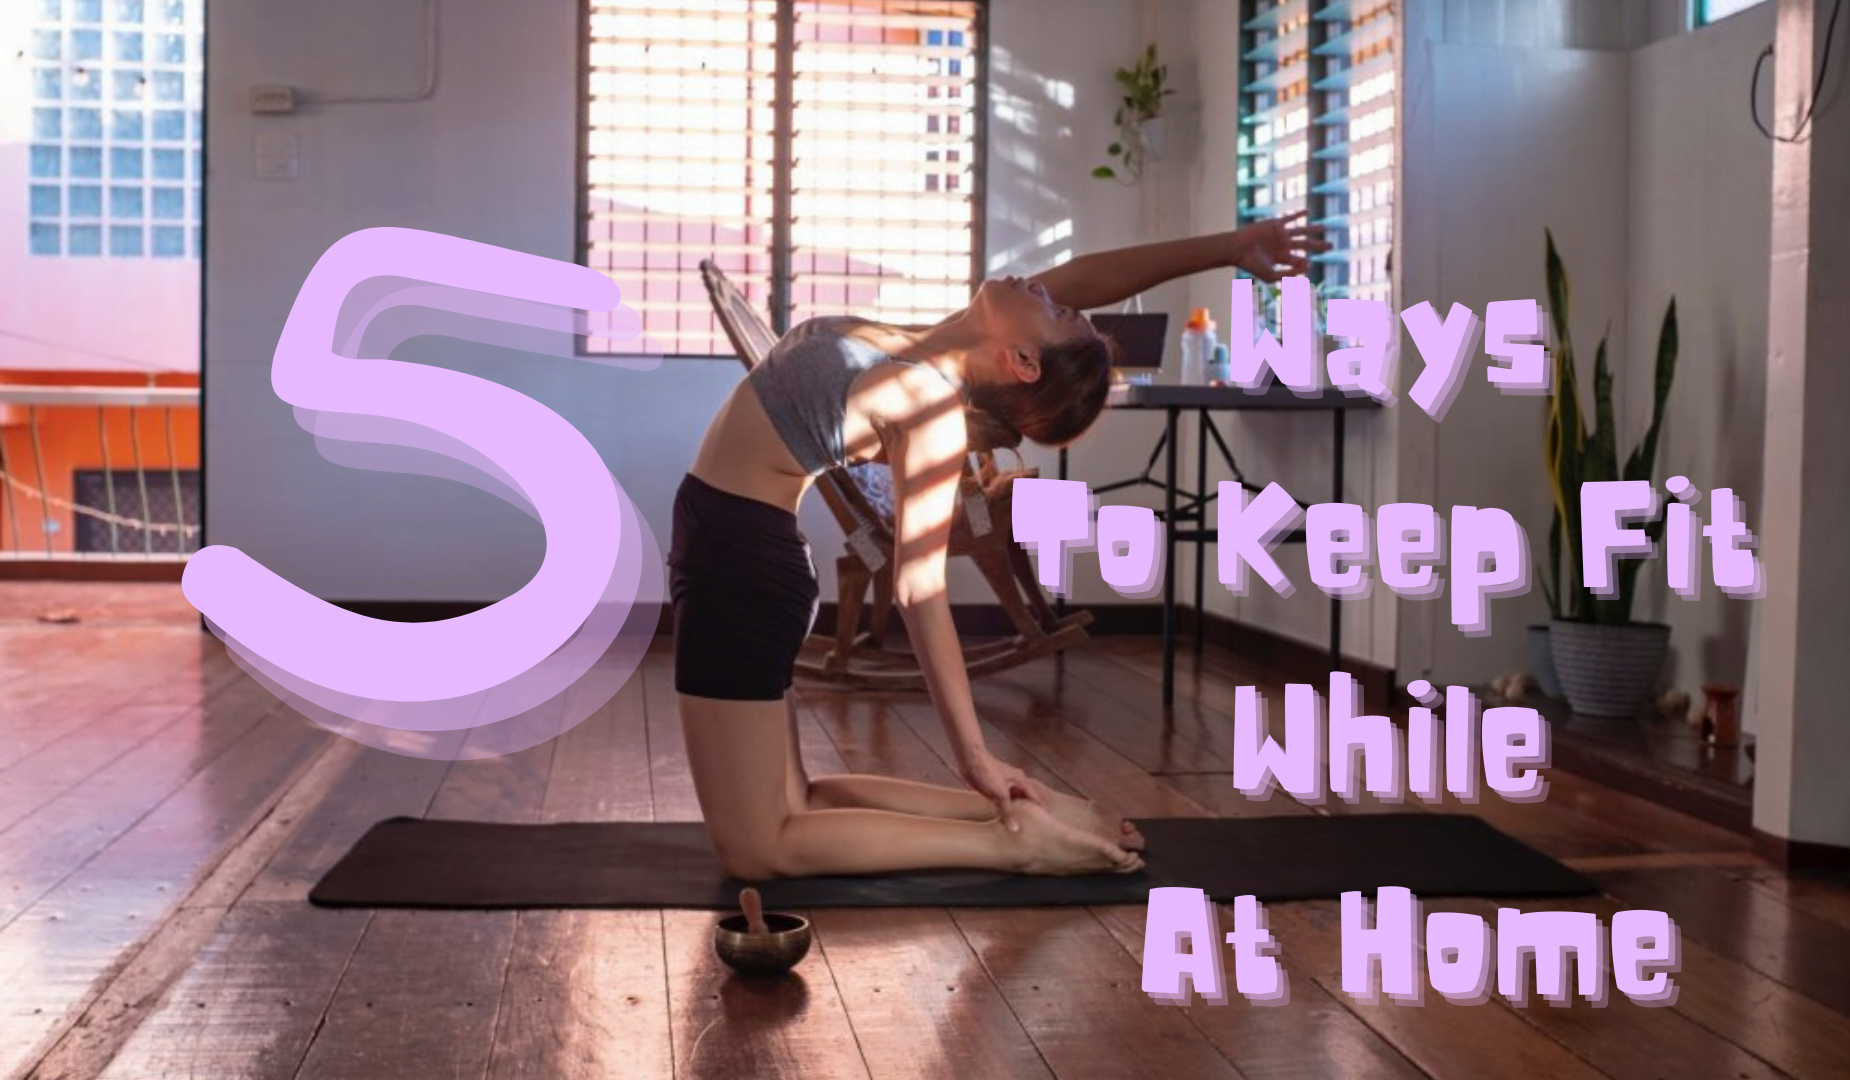 5 Ways to Keep Fit While at Home